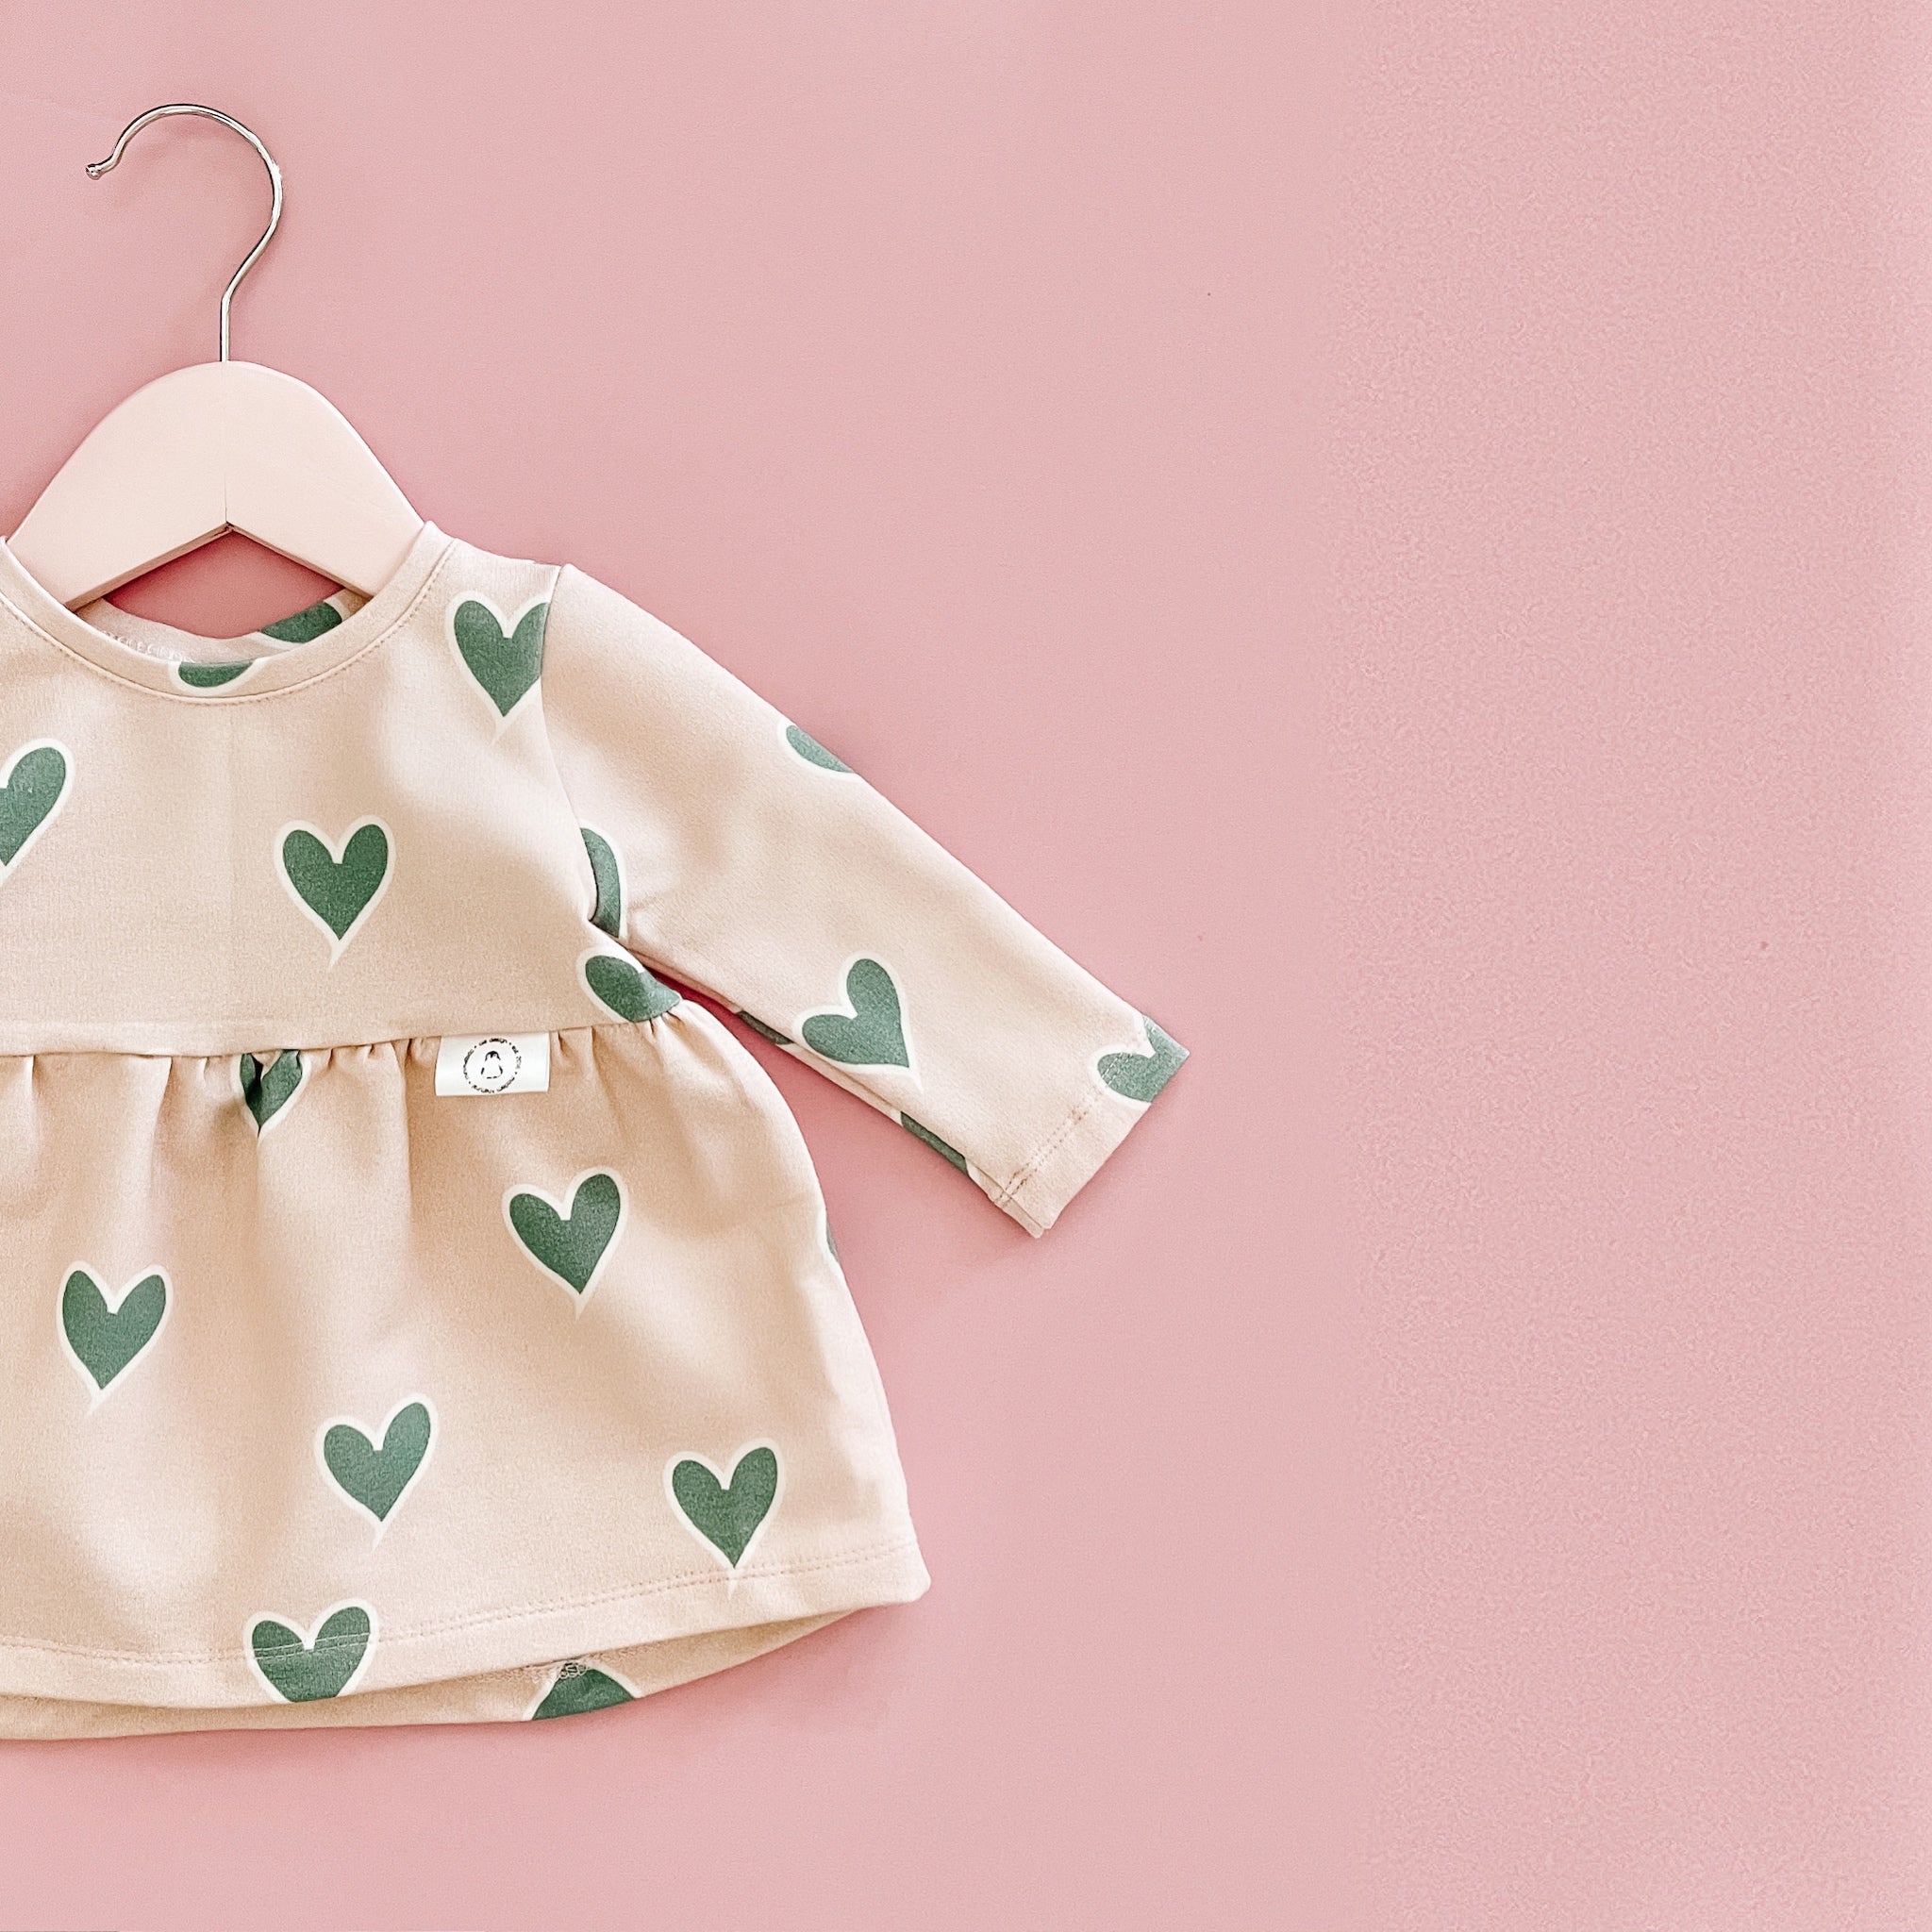 “Zoe” dress with Whimsical Hearts